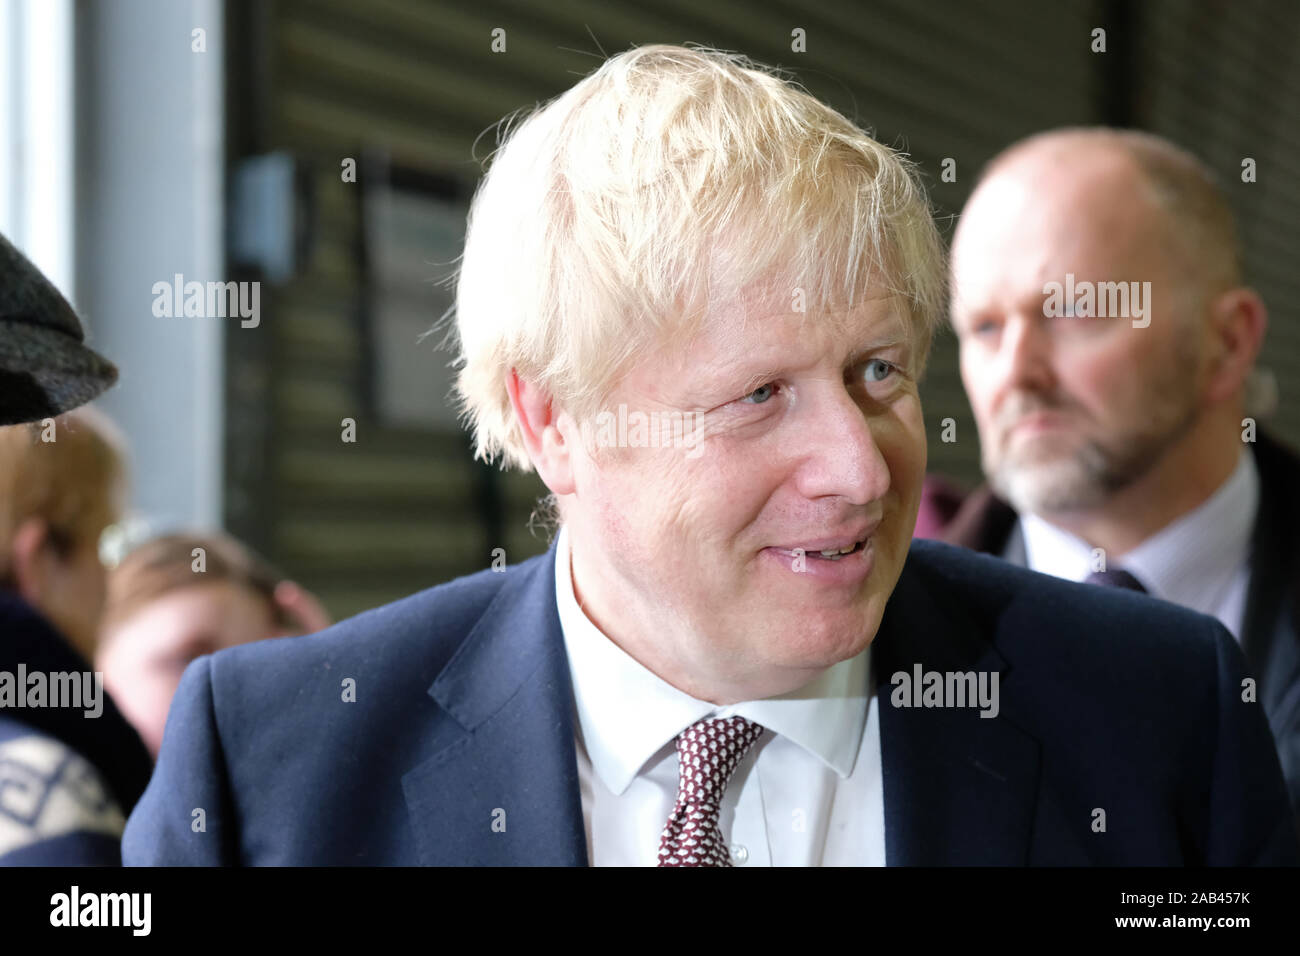 Royal Welsh Winter Fair, Builth Wells, Powys, Wales, UK - Monday 25th November 2019 - Prime Minister Boris Johnson tours the Royal Welsh Winter Fair on the latest stage of his UK Election tour meeting the farming and rural community in Mid Wales. Credit: Steven May/Alamy Live News Stock Photo